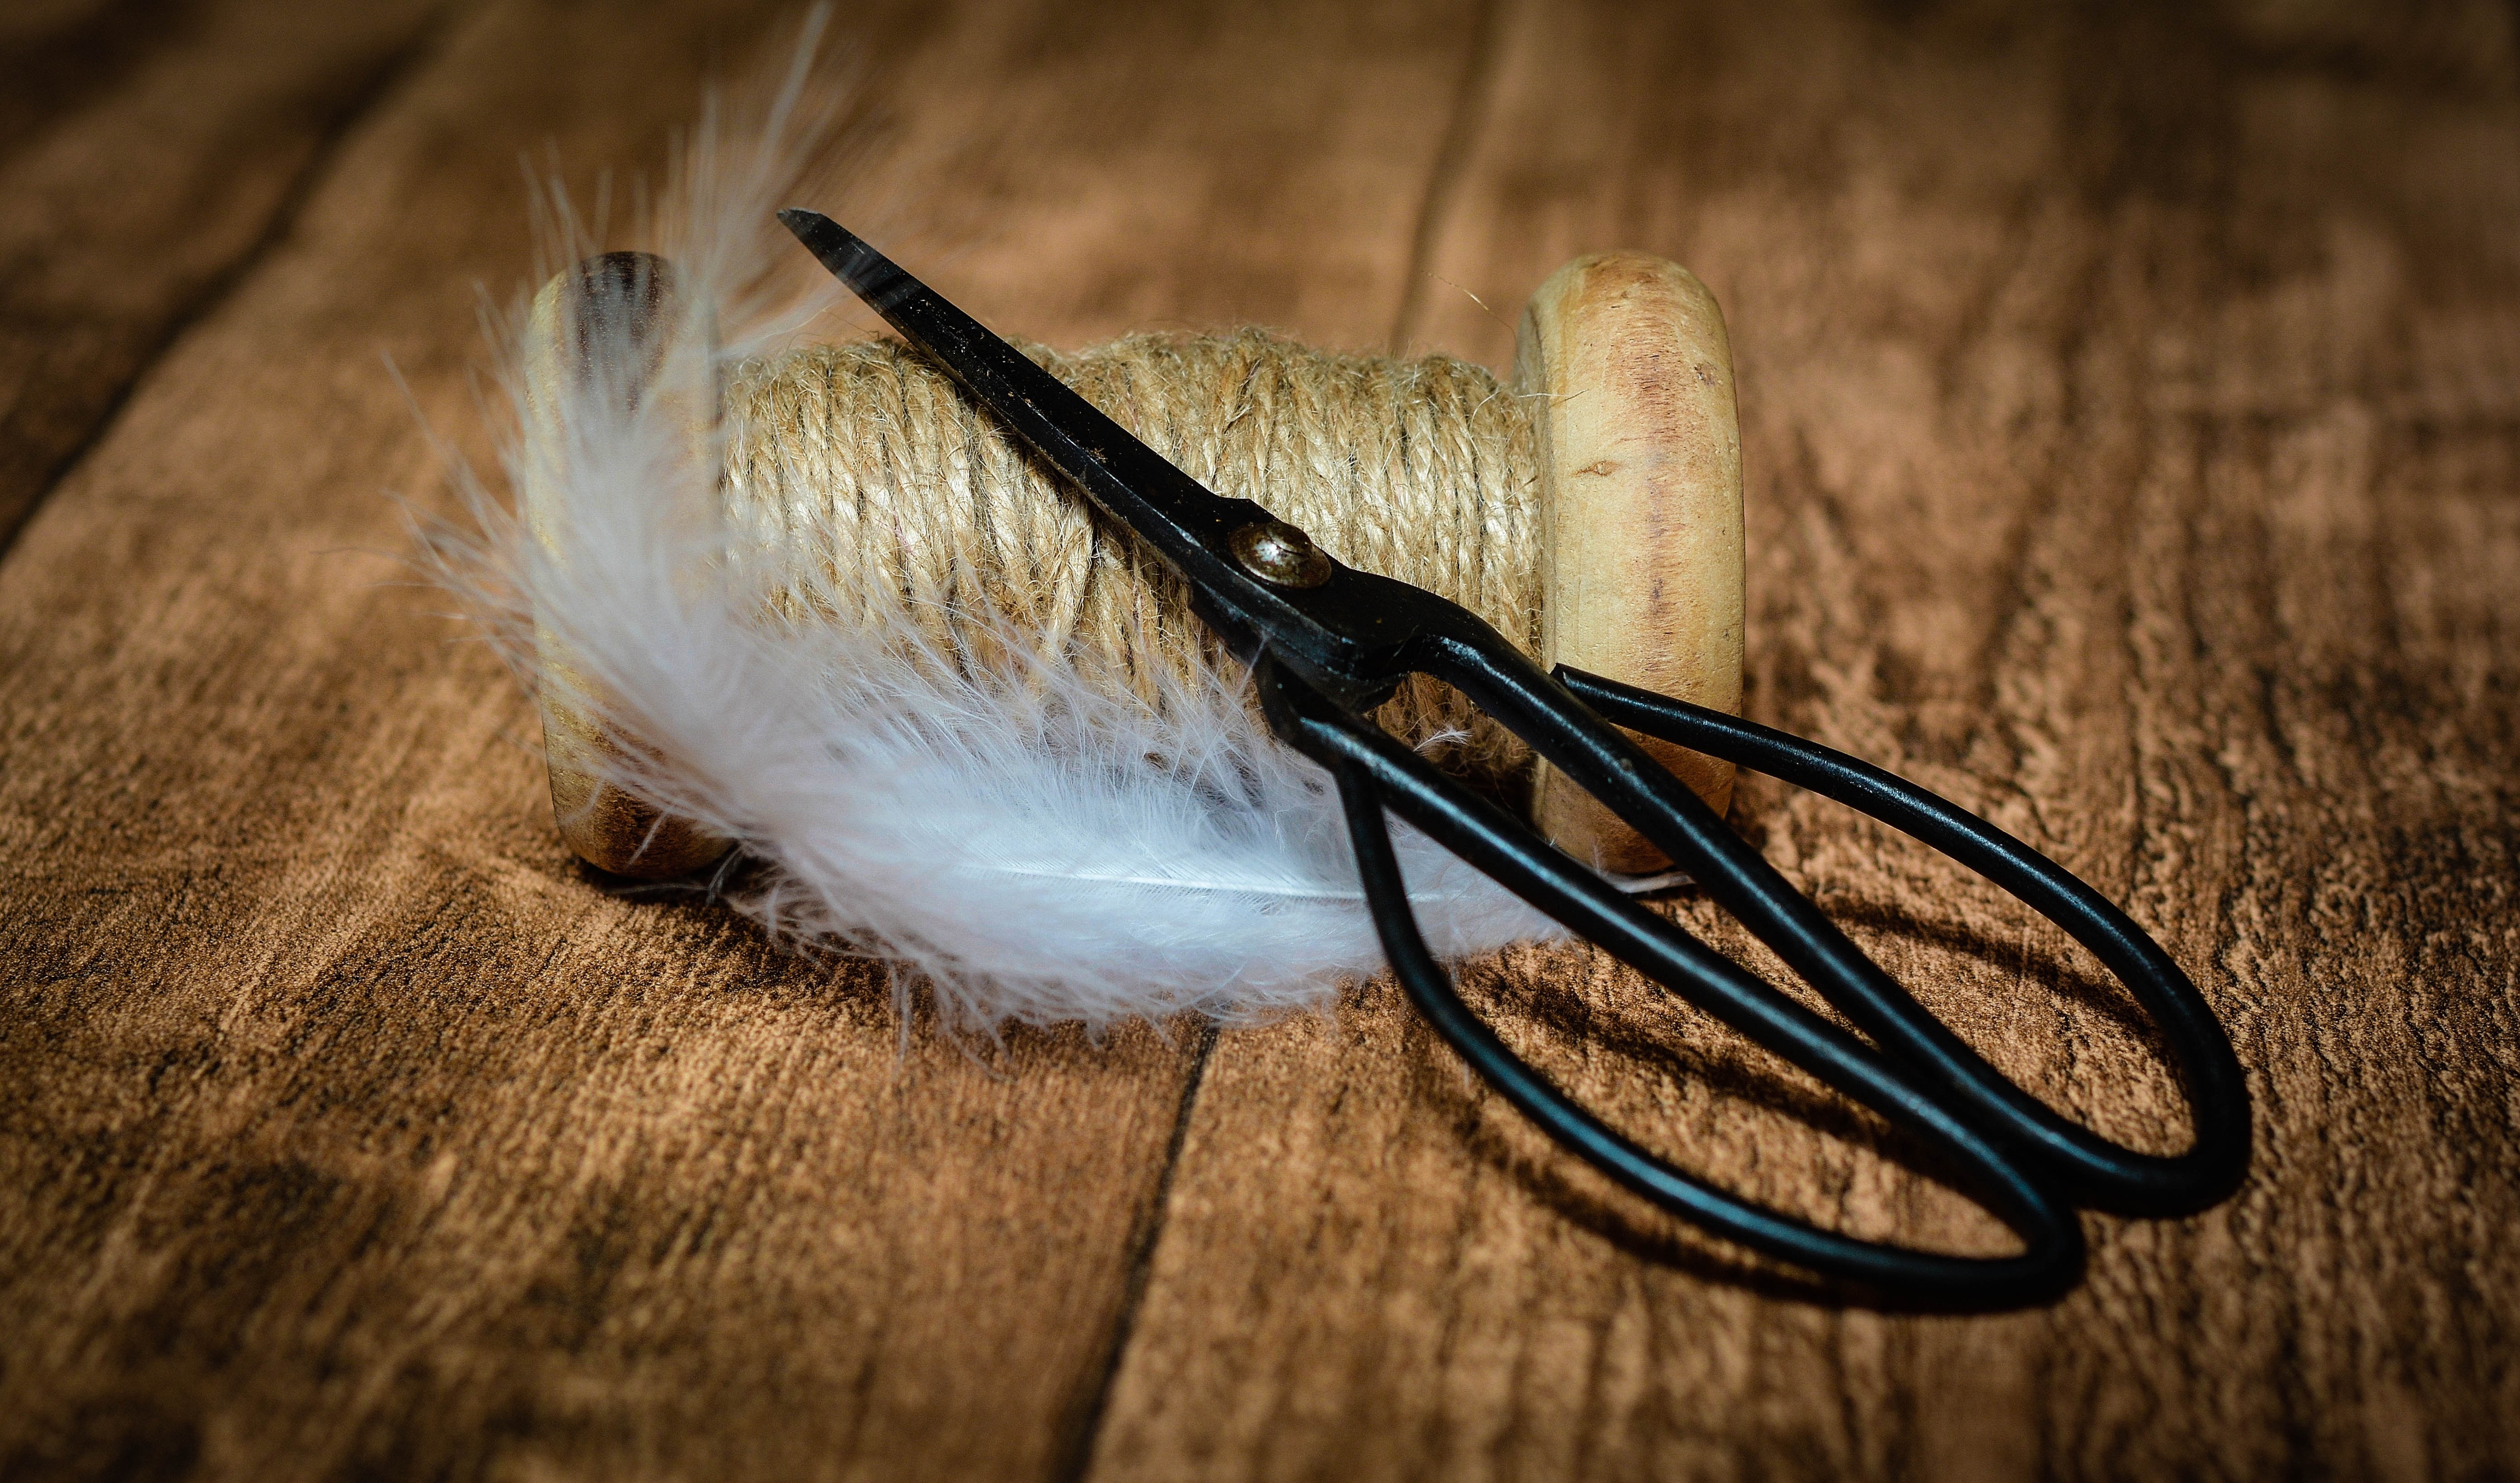 black scissors near rope reel with white feather